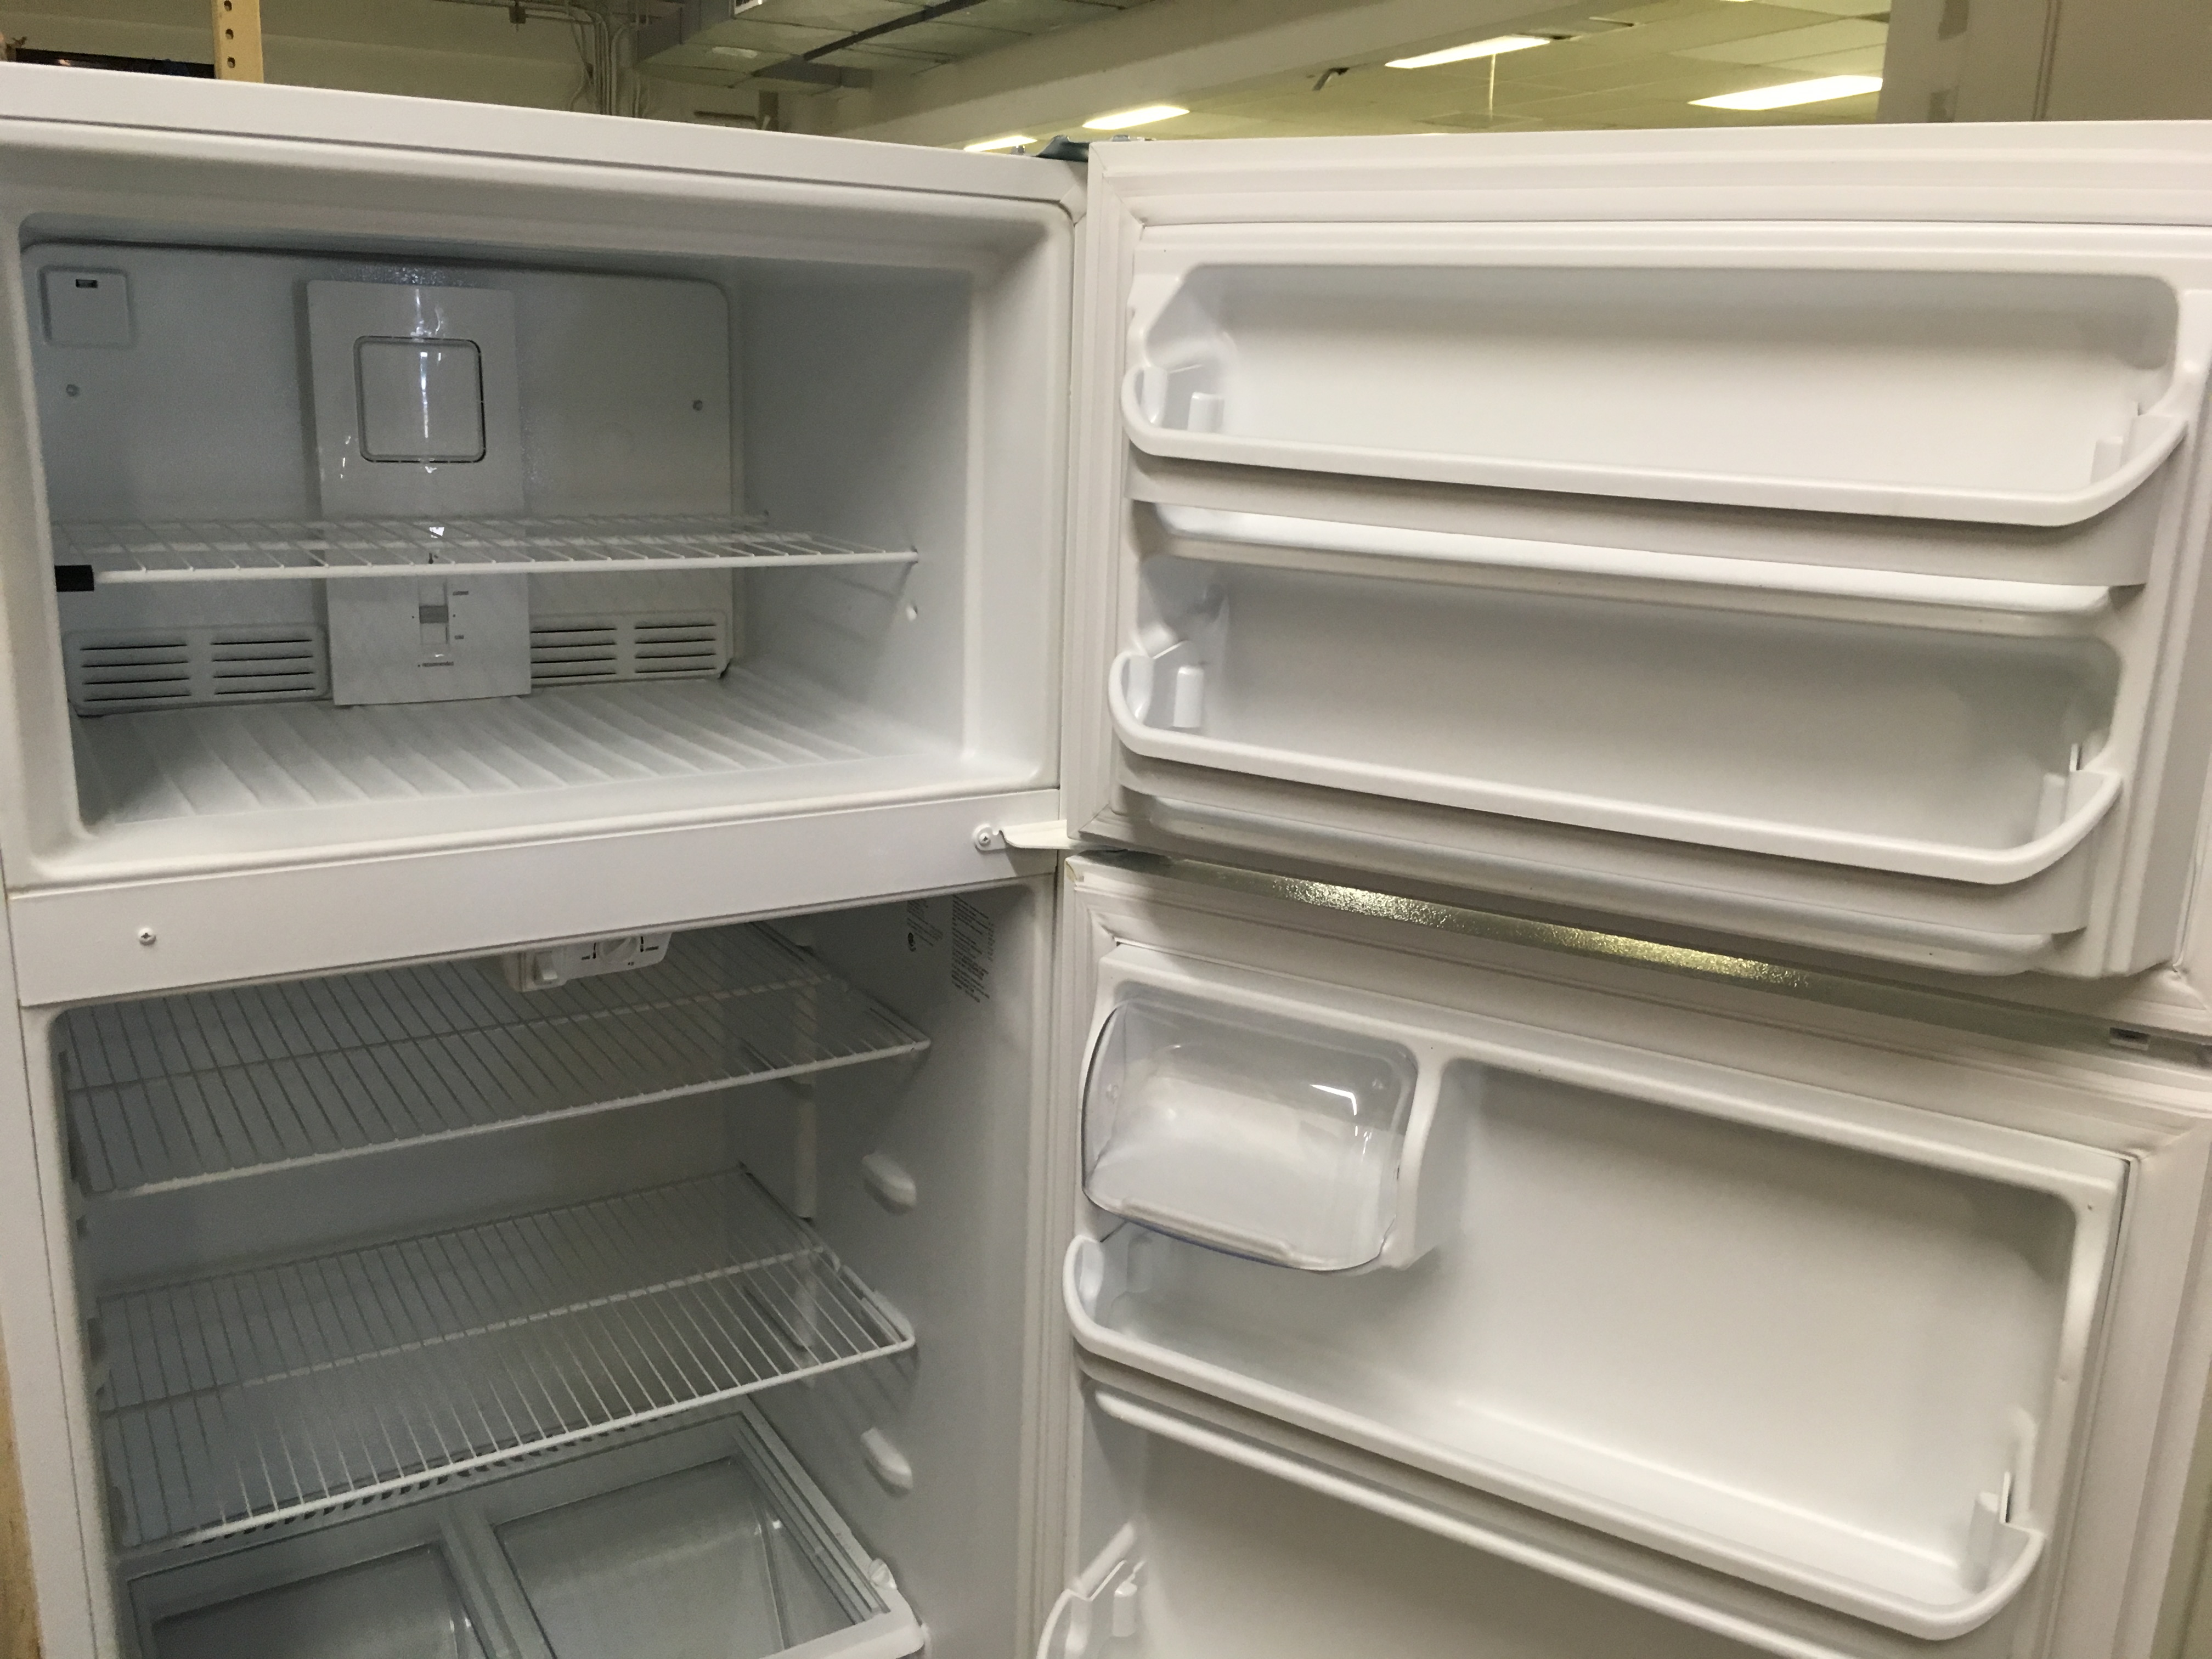 Beautiful Frigidaire Refrigerator, Top-Mount, Free-Standing, White Textured, Capacity 18.0 Cu.Ft., Quality Refurbished, 1-Year Parts Warranty!